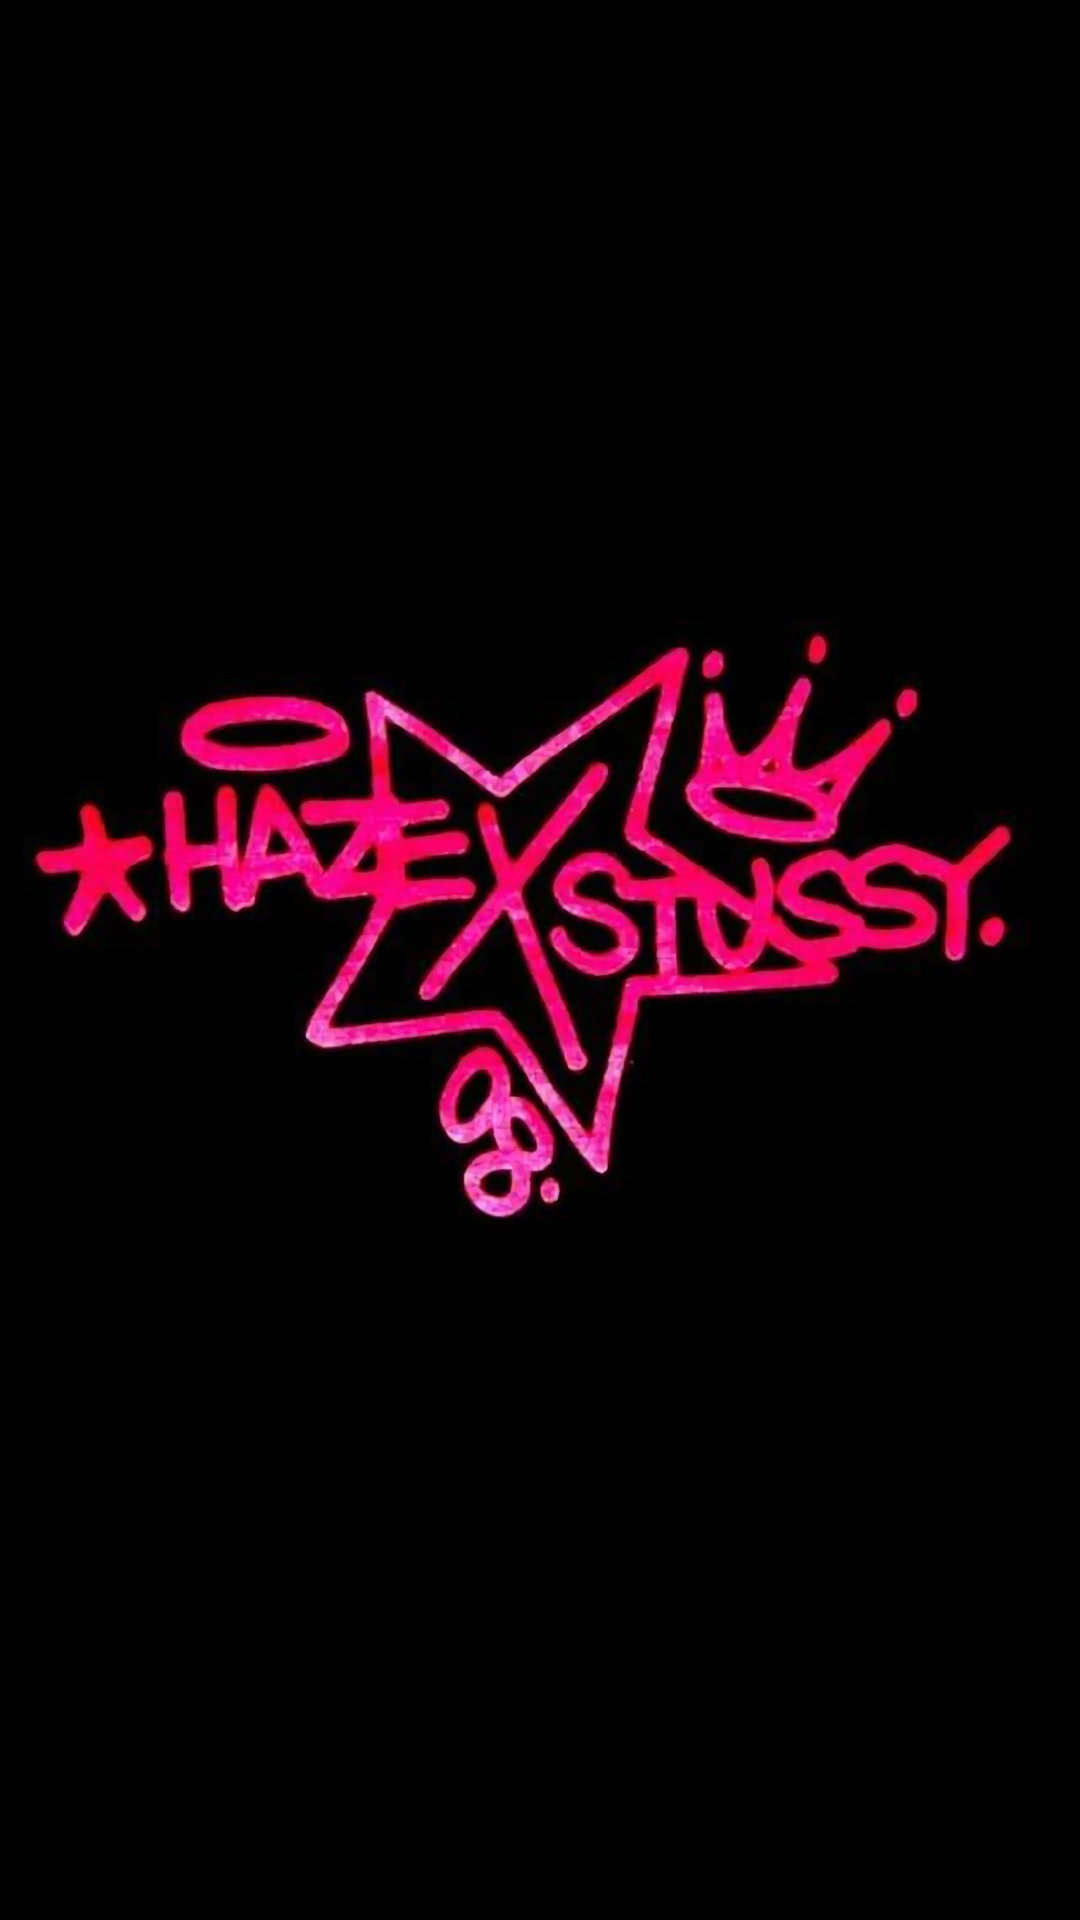 Stussy ステューシー ピンク ブラック Iphone Wallpapers